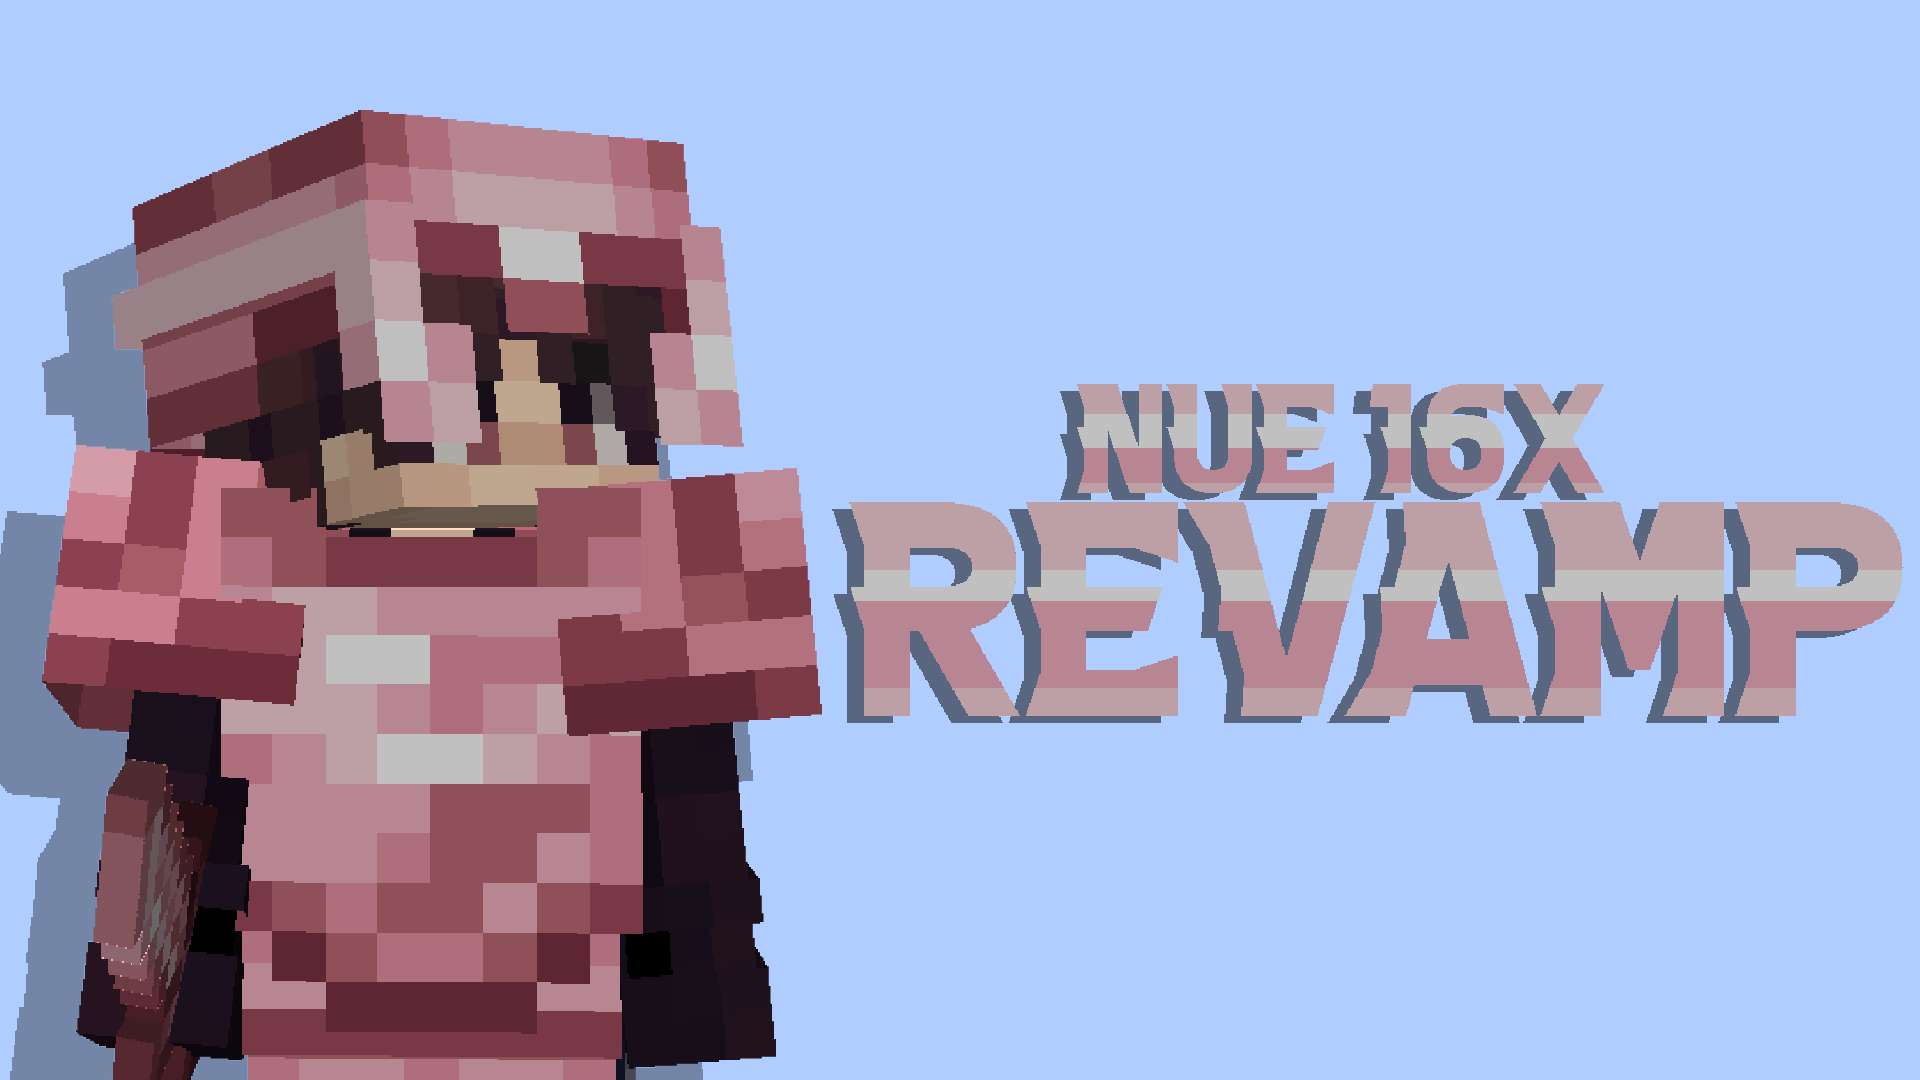 Nue revamp 16x by jaxxthatsall on PvPRP